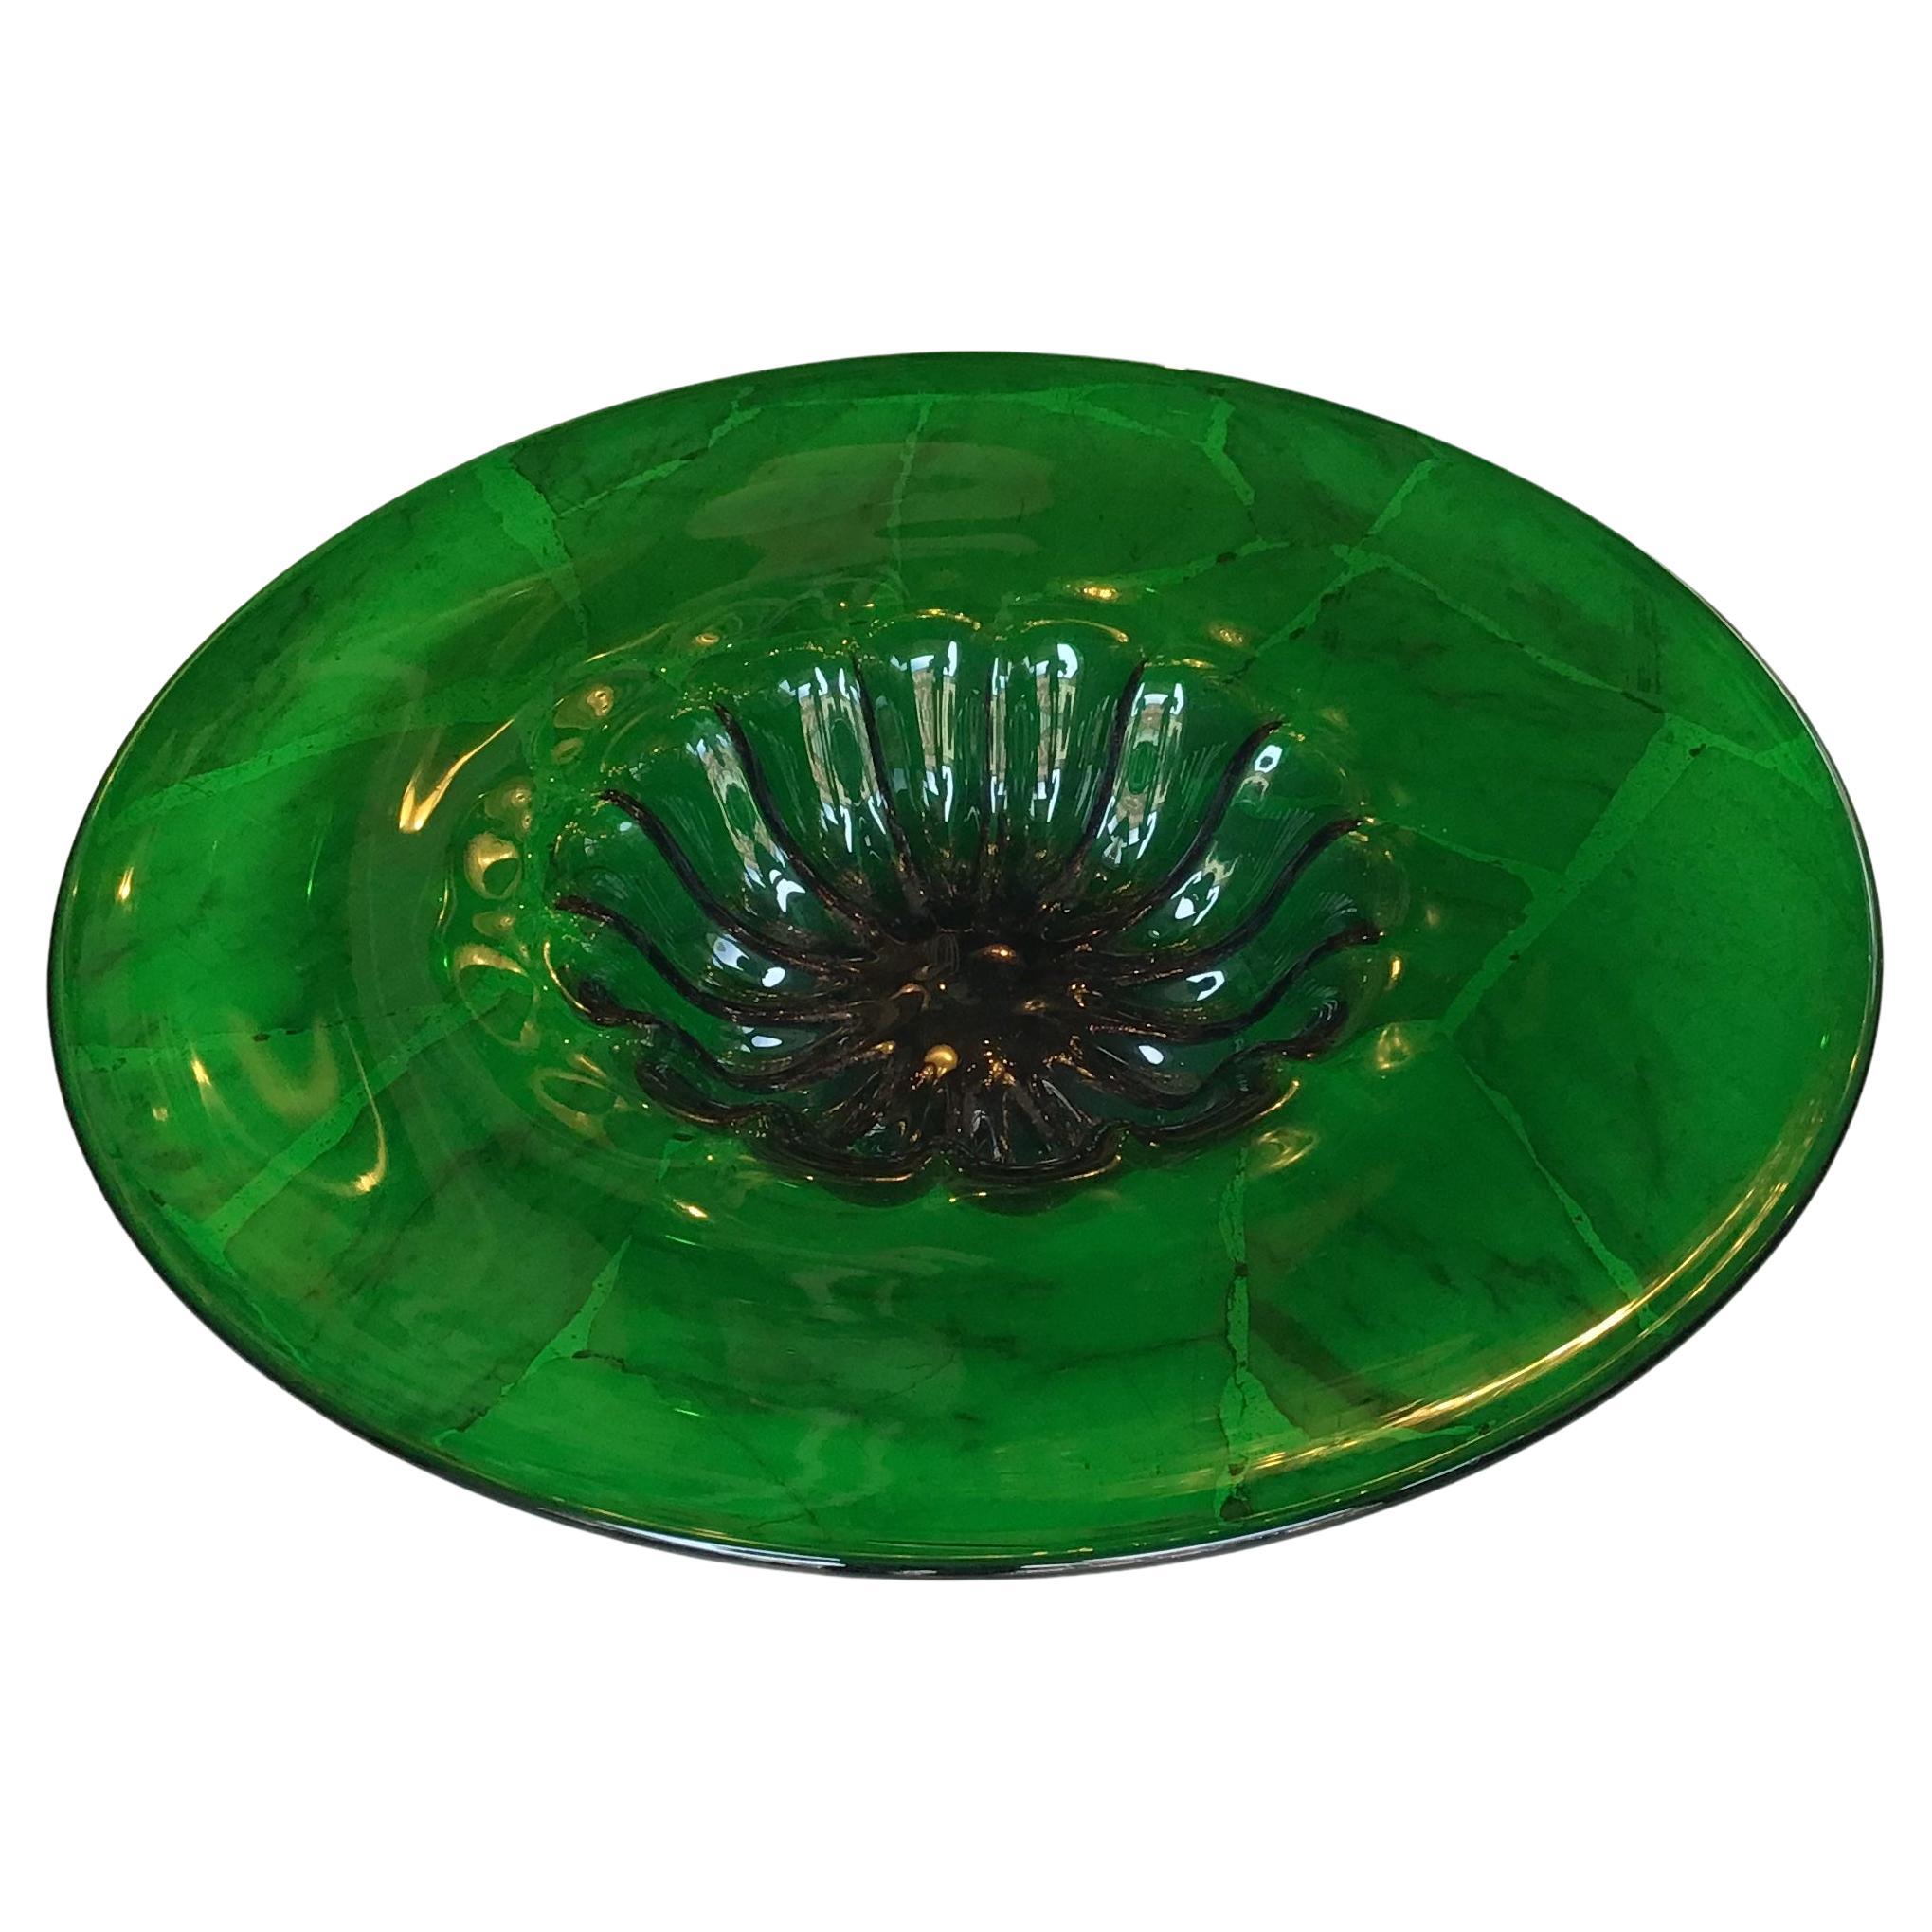 Empoli Centerpiece Plate Glass 1950 Italy For Sale